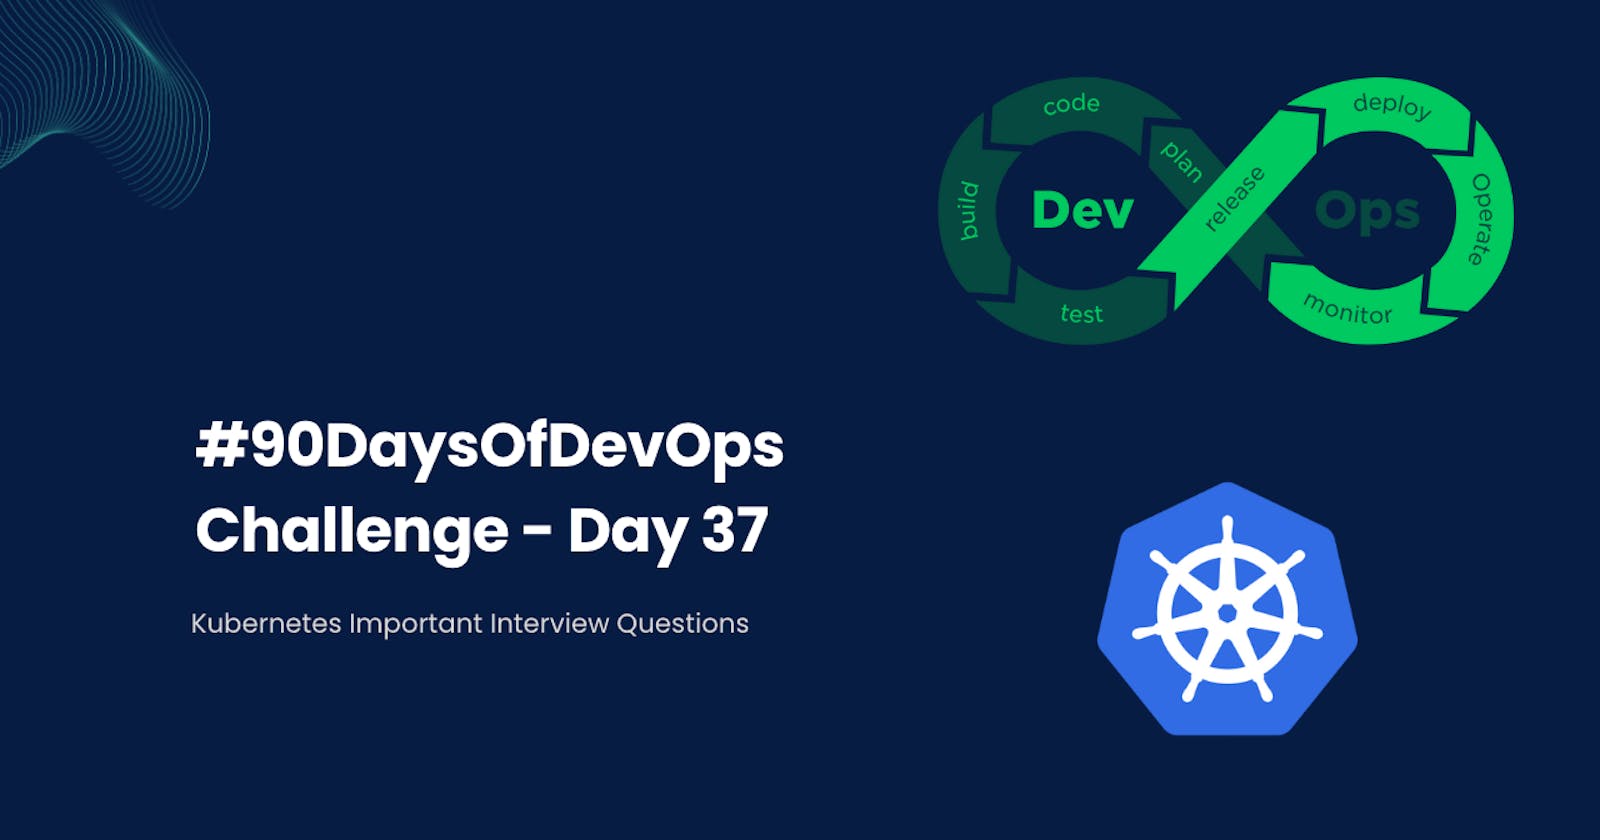 #90DaysOfDevOps Challenge - Day 37 - Kubernetes Important Interview Questions